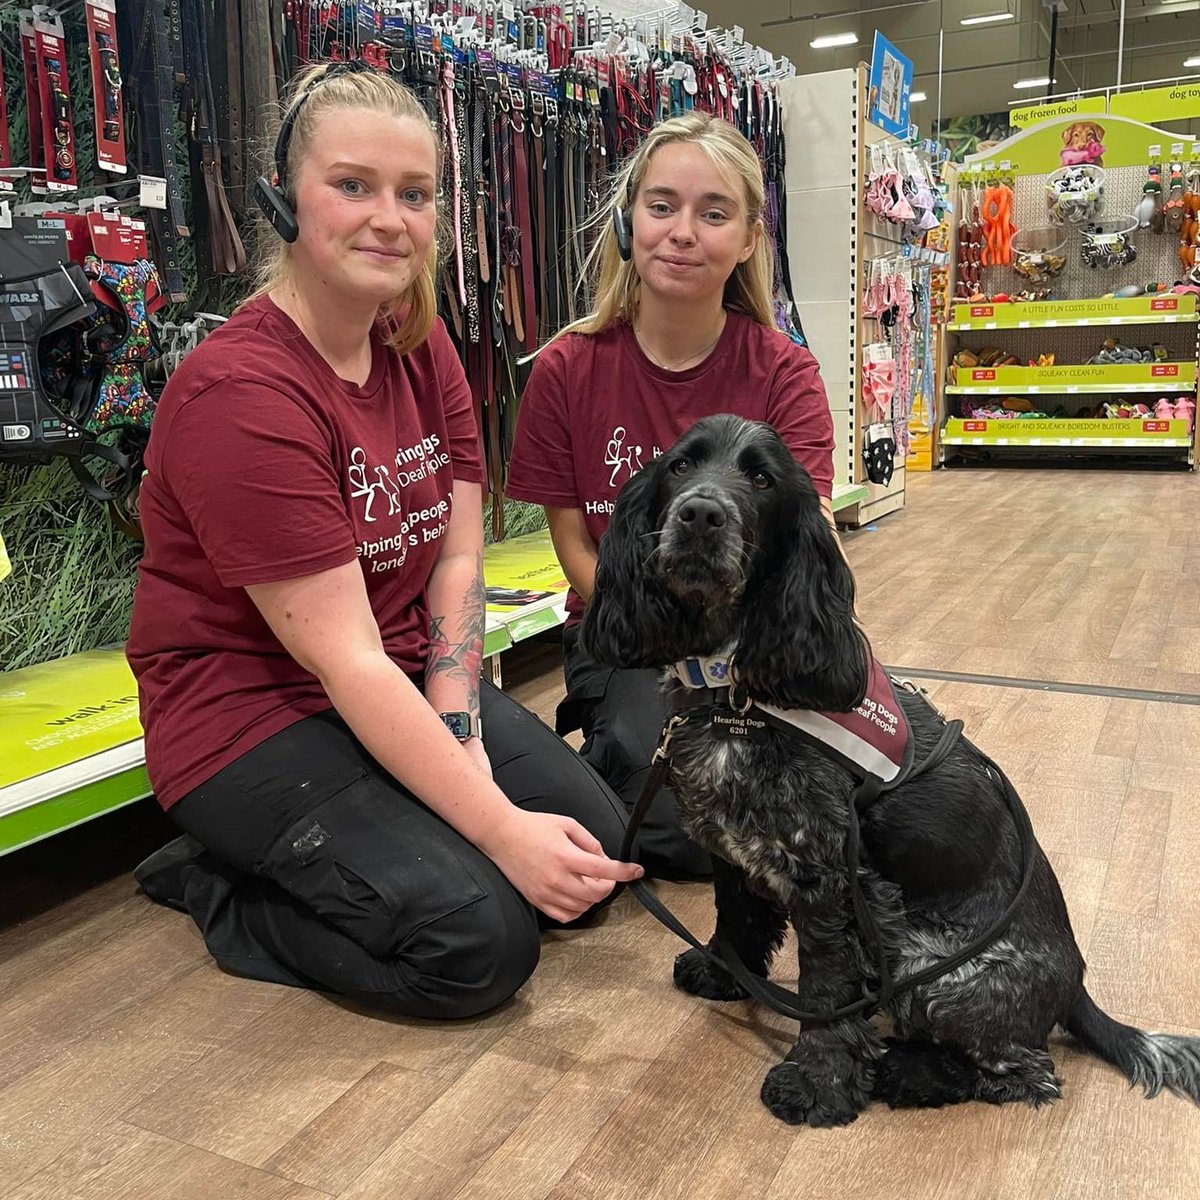 We are so excited for @PetsatHome's summer fundraiser, which starts next week. Hearing Dogs has been chosen as the beneficiary charity for a second year, and last year’s fundraiser raised over £630,000!